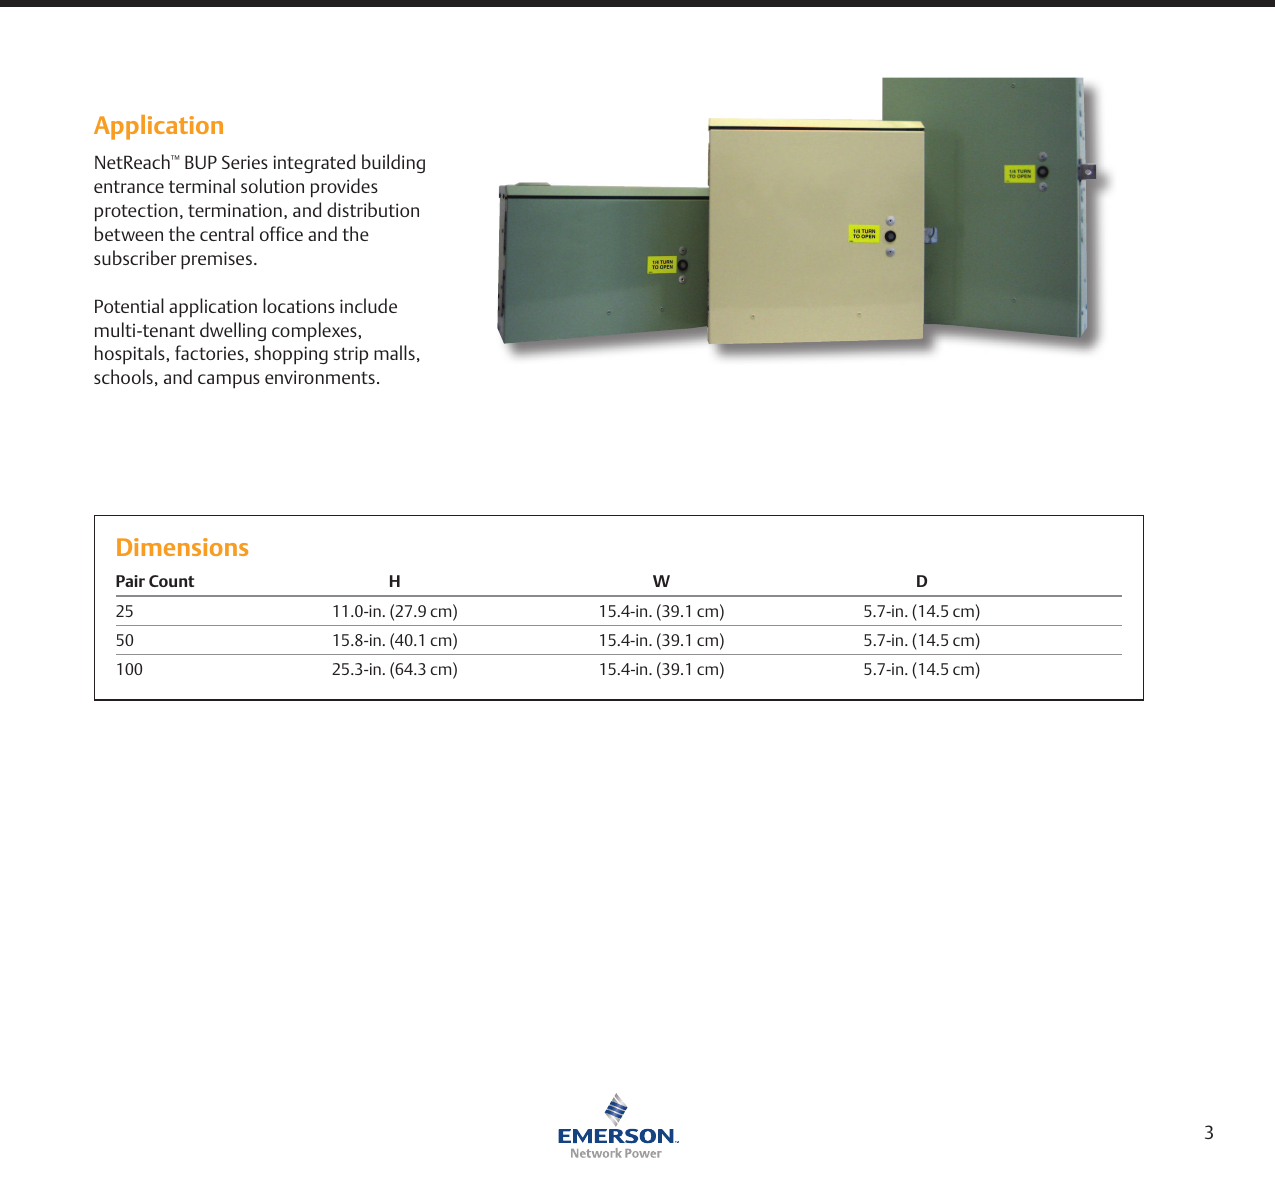 Page 3 of 8 - Emerson Emerson-Netreach-Bup-Series-Brochures-And-Data-Sheets-  Emerson-netreach-bup-series-brochures-and-data-sheets